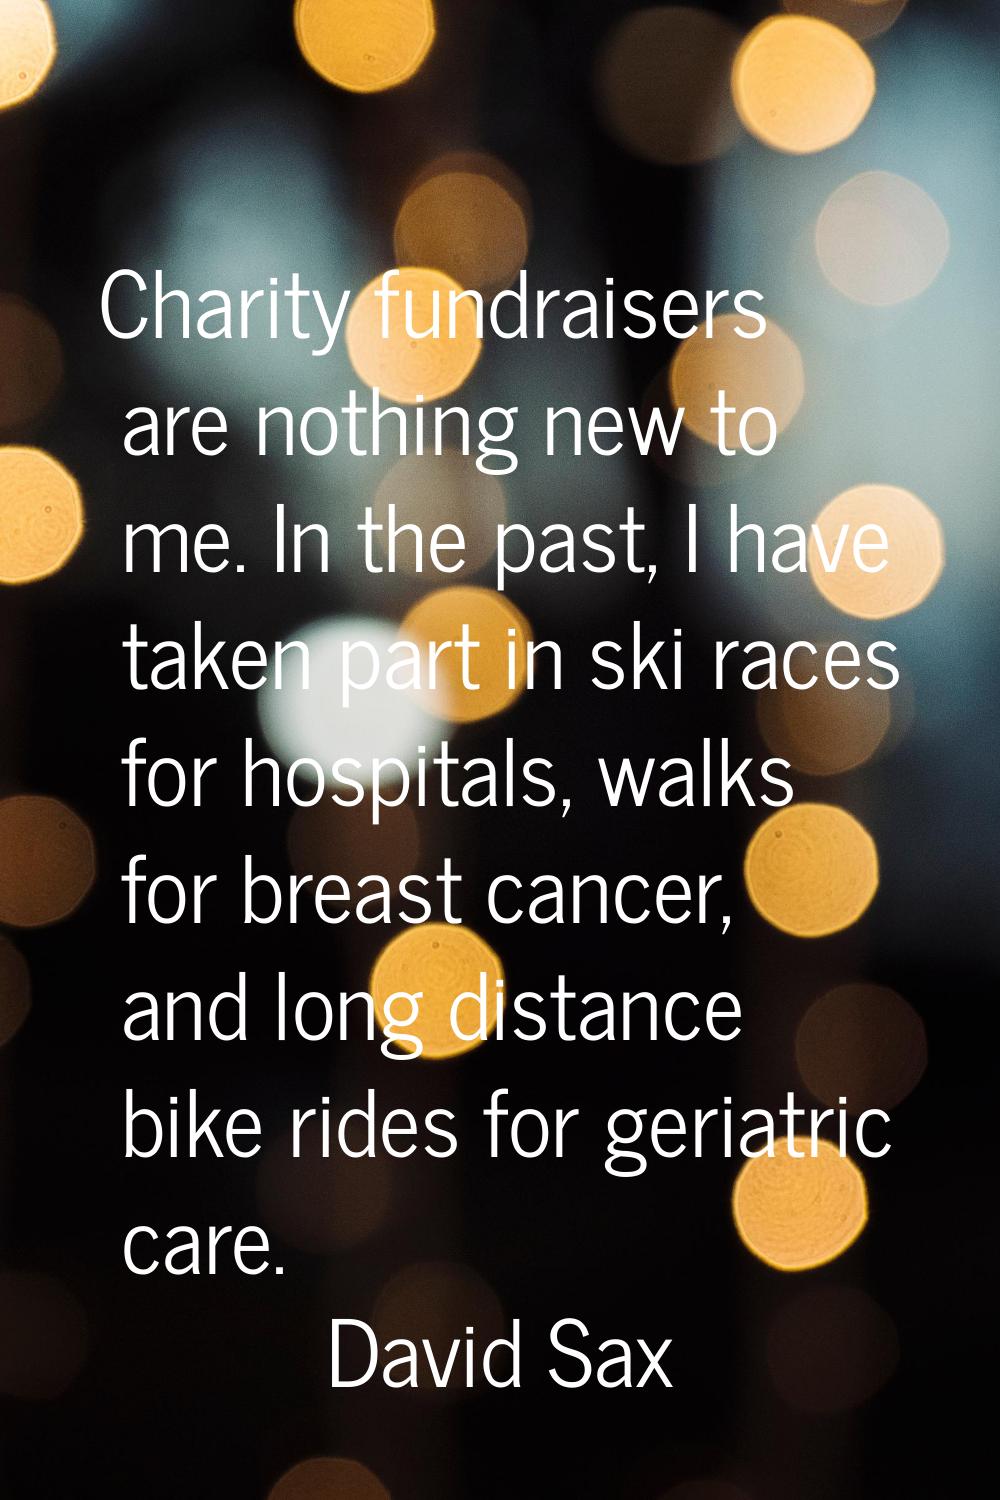 Charity fundraisers are nothing new to me. In the past, I have taken part in ski races for hospital